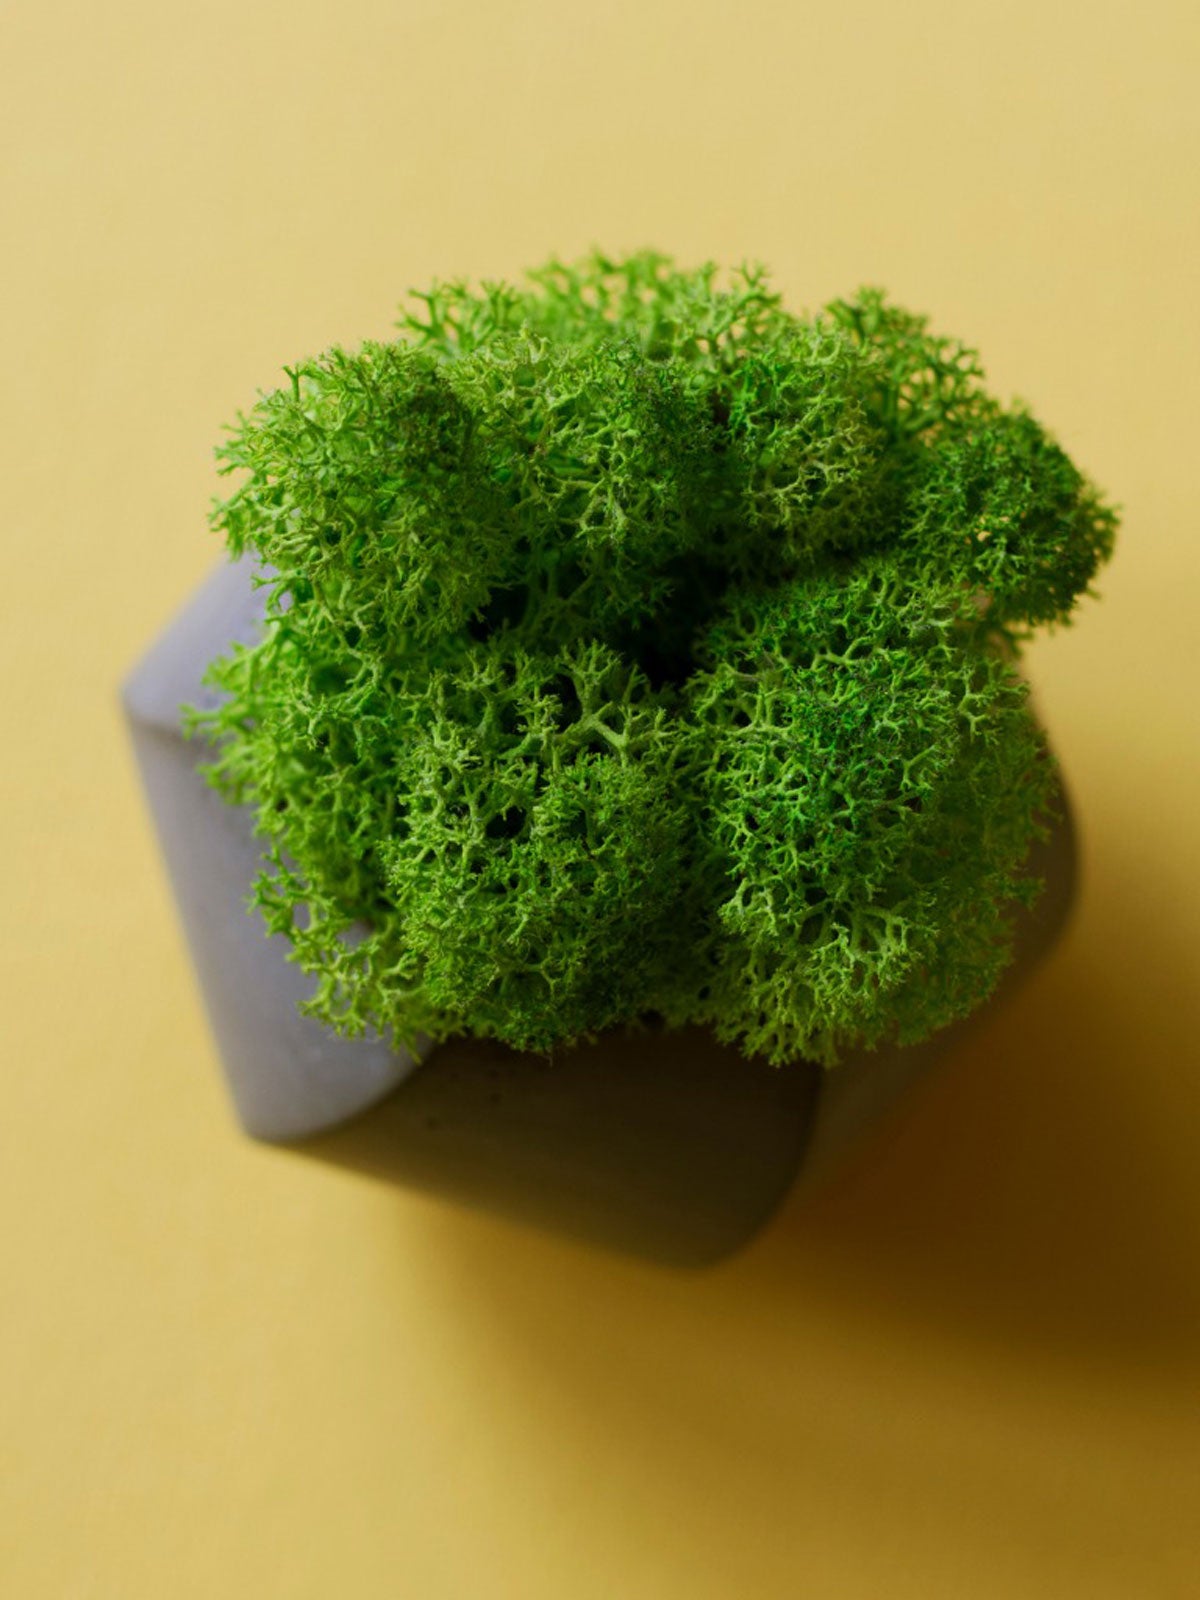 How to decorate with moss in your garden